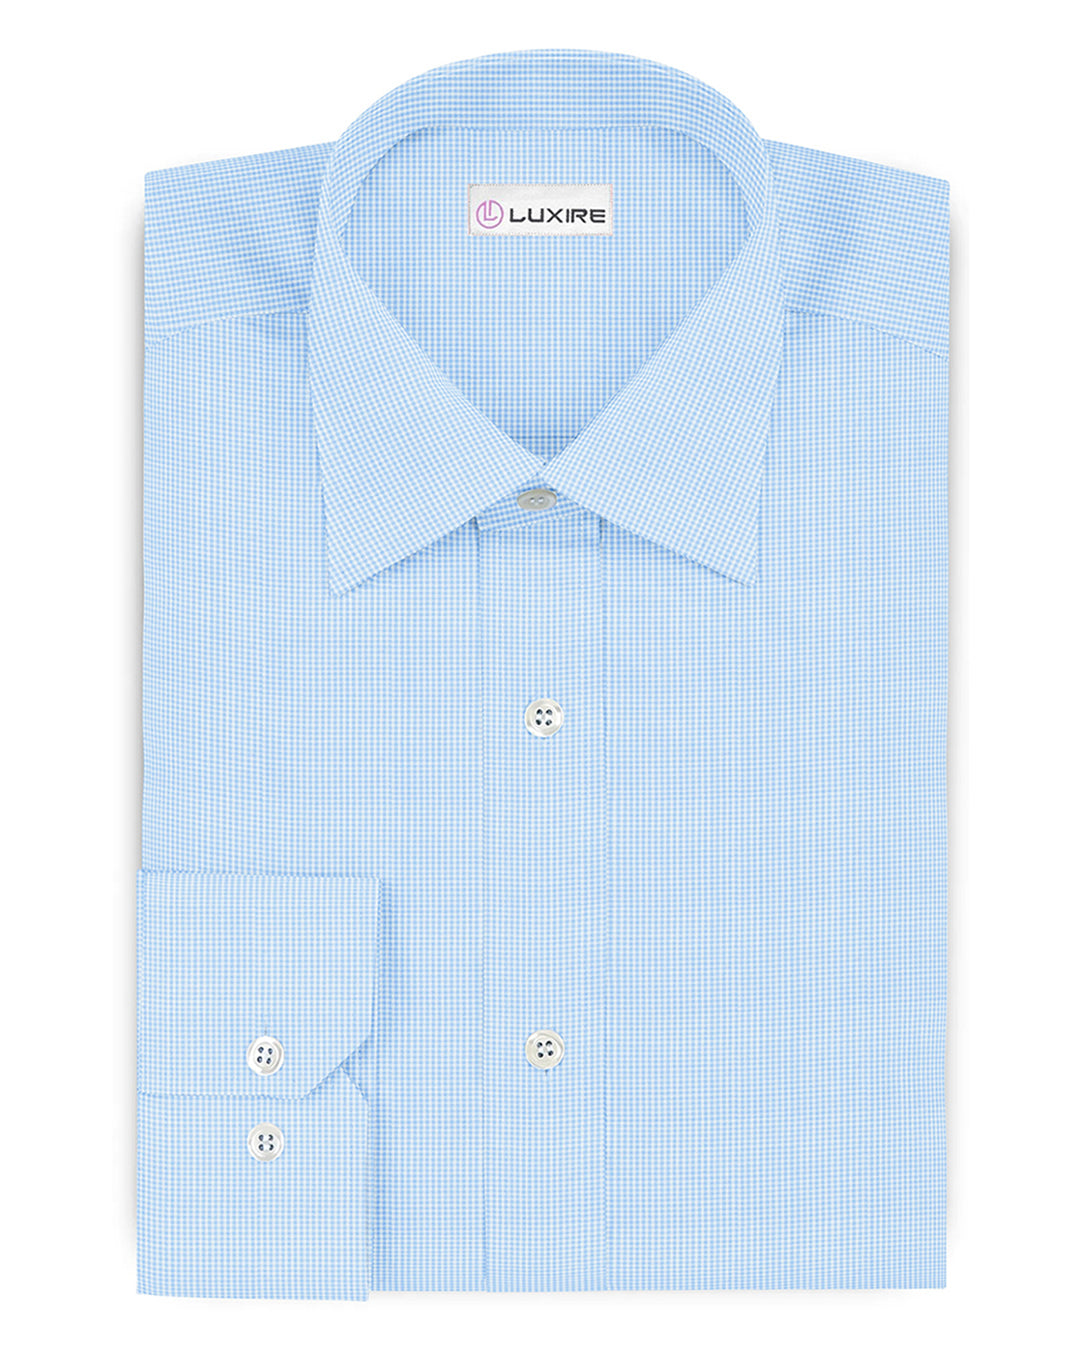 The Finest - Luxire Blue Gingham 300/4